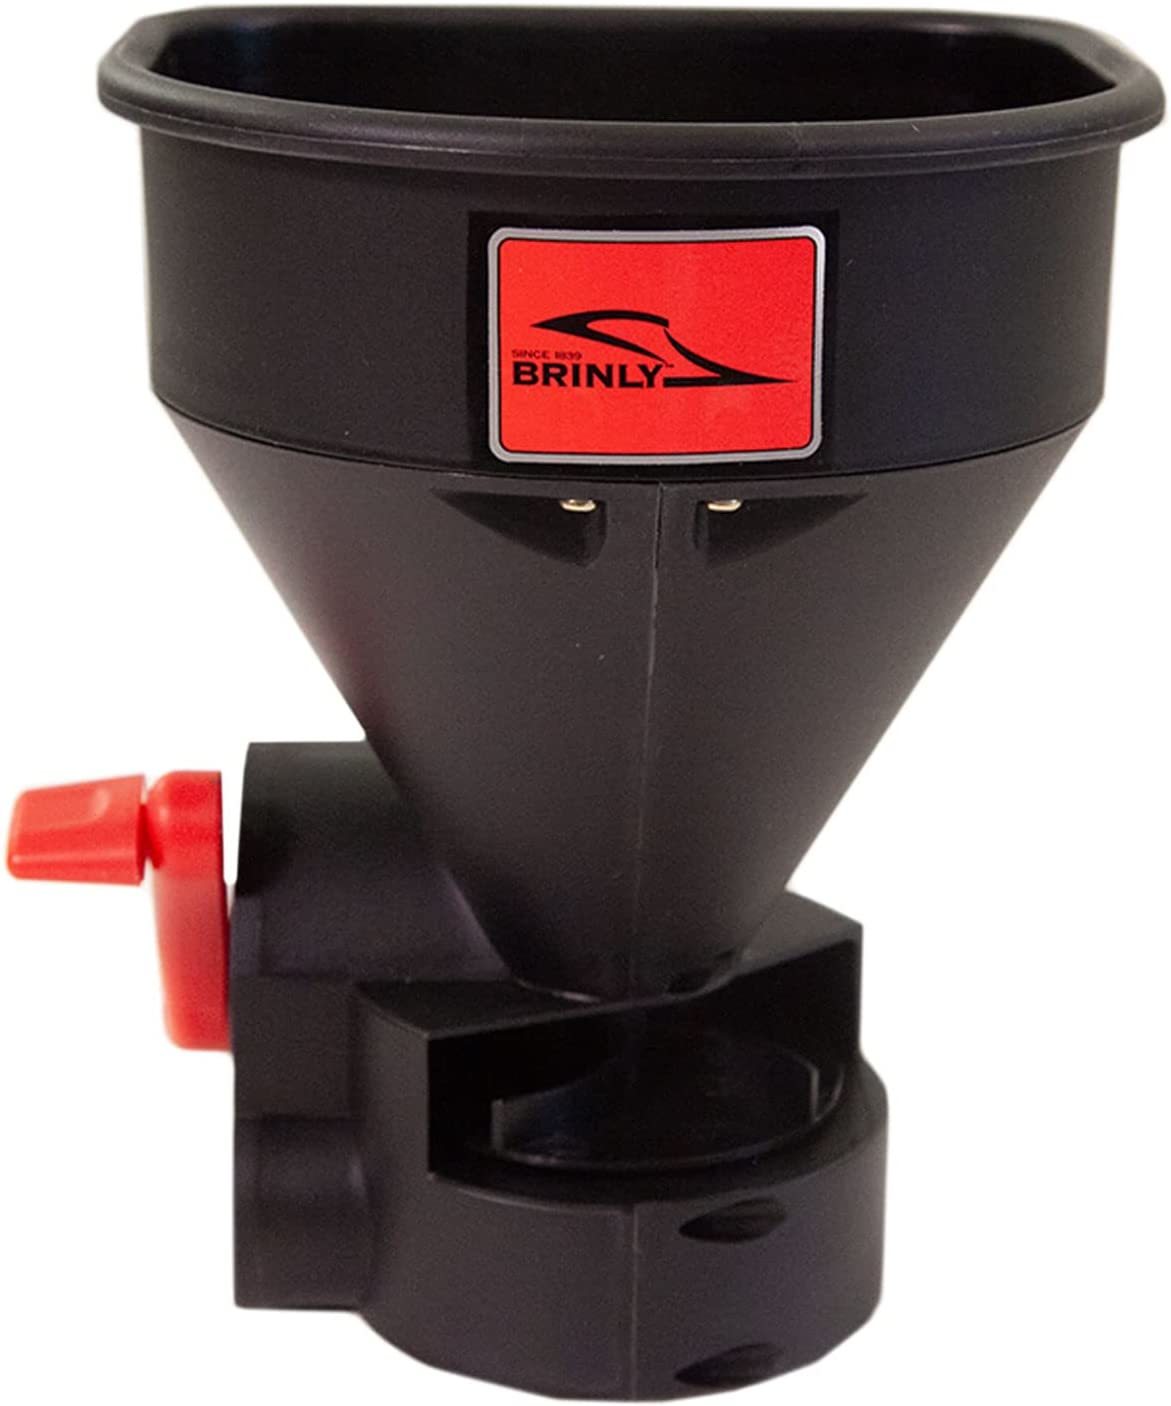 Brinly Hhs3-5Bh 5Lb. All-Season Handheld Spreader With Easy-Fill, & Fertilizer - $43.99